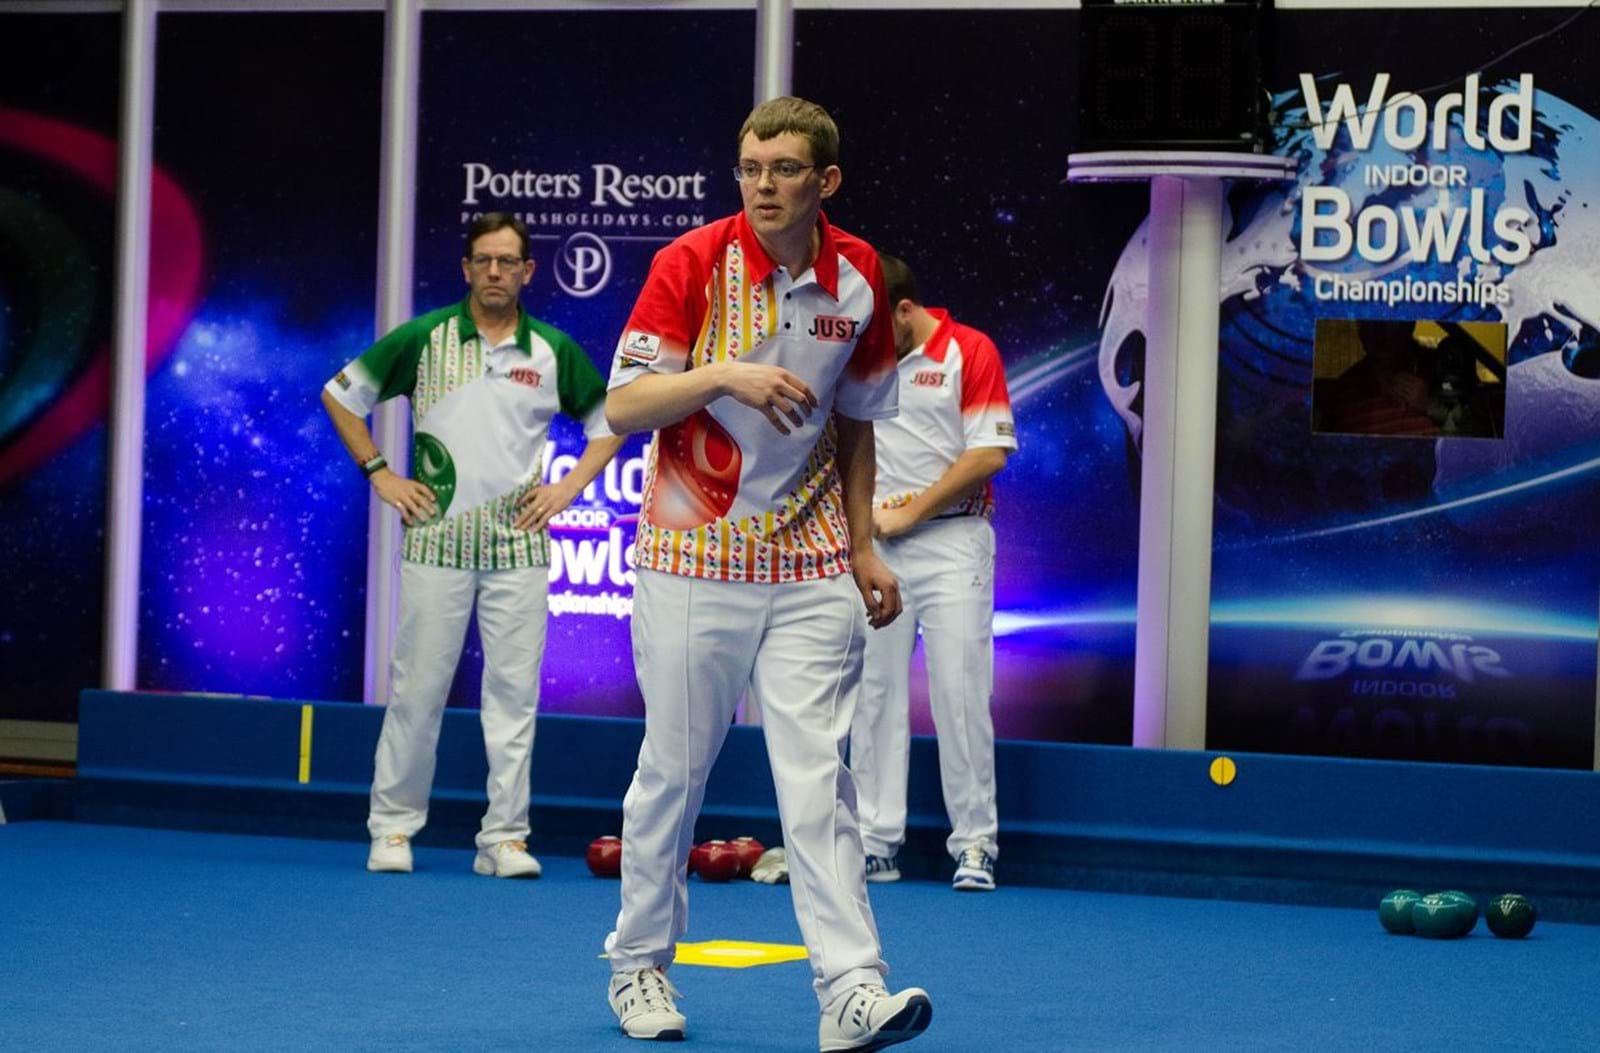 SUNSET+VINE’S PERFECT DELIVERY SECURES WORLD INDOOR PROFESSIONAL BOWLS CHAMPIONSHIPS WIN